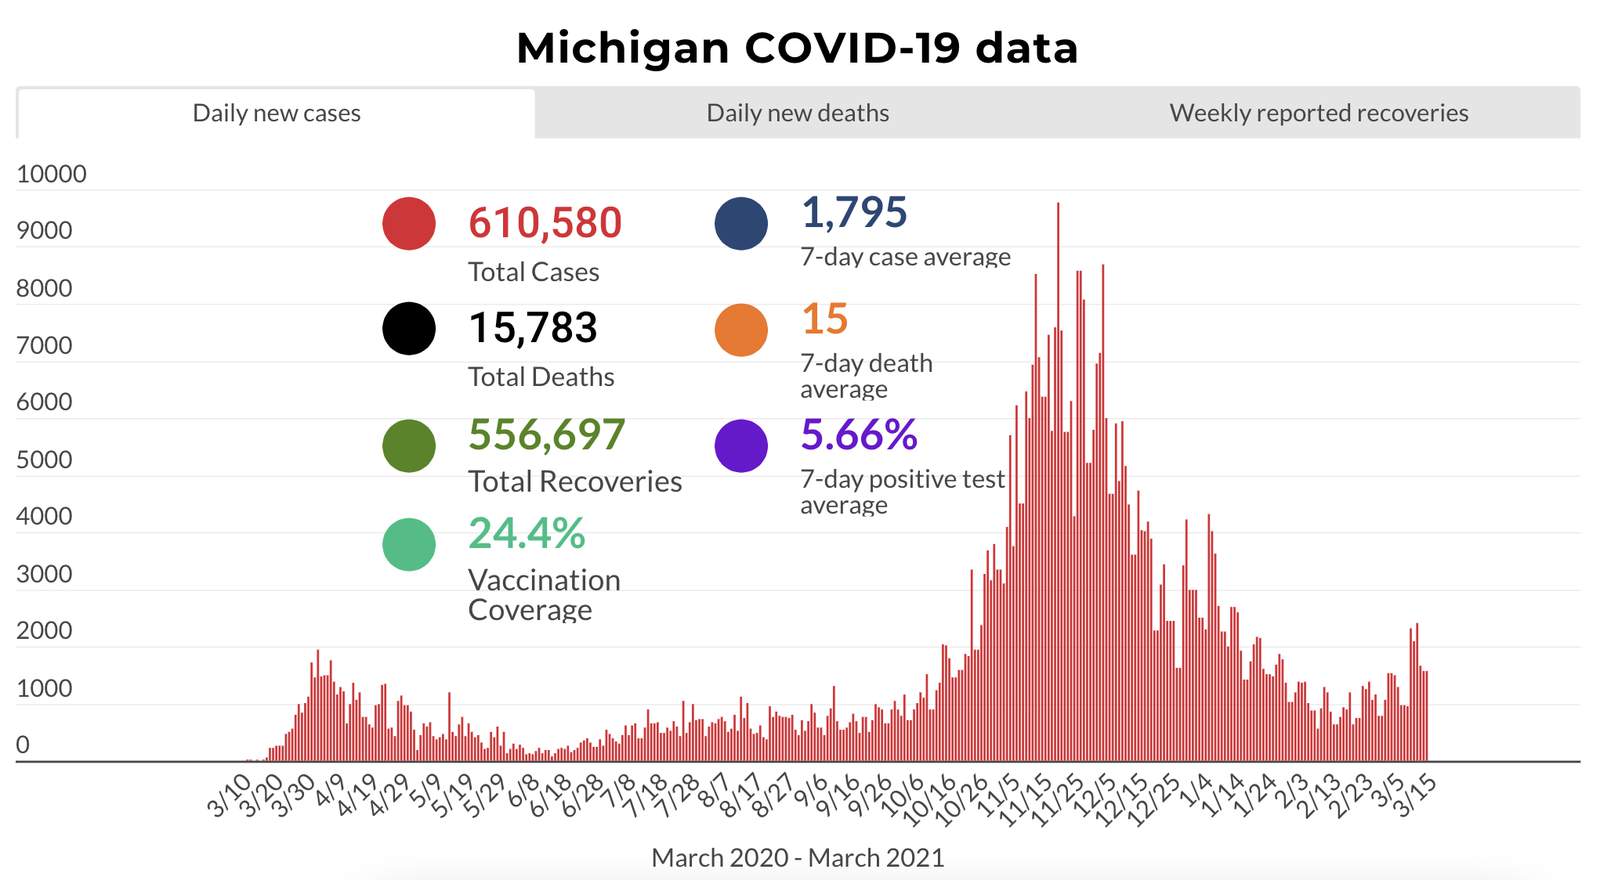 Morning Briefing March 16, 2021: Michigan COVID data shows trouble trends, registration for vaccine at Ford Field now open, Lions roster changes